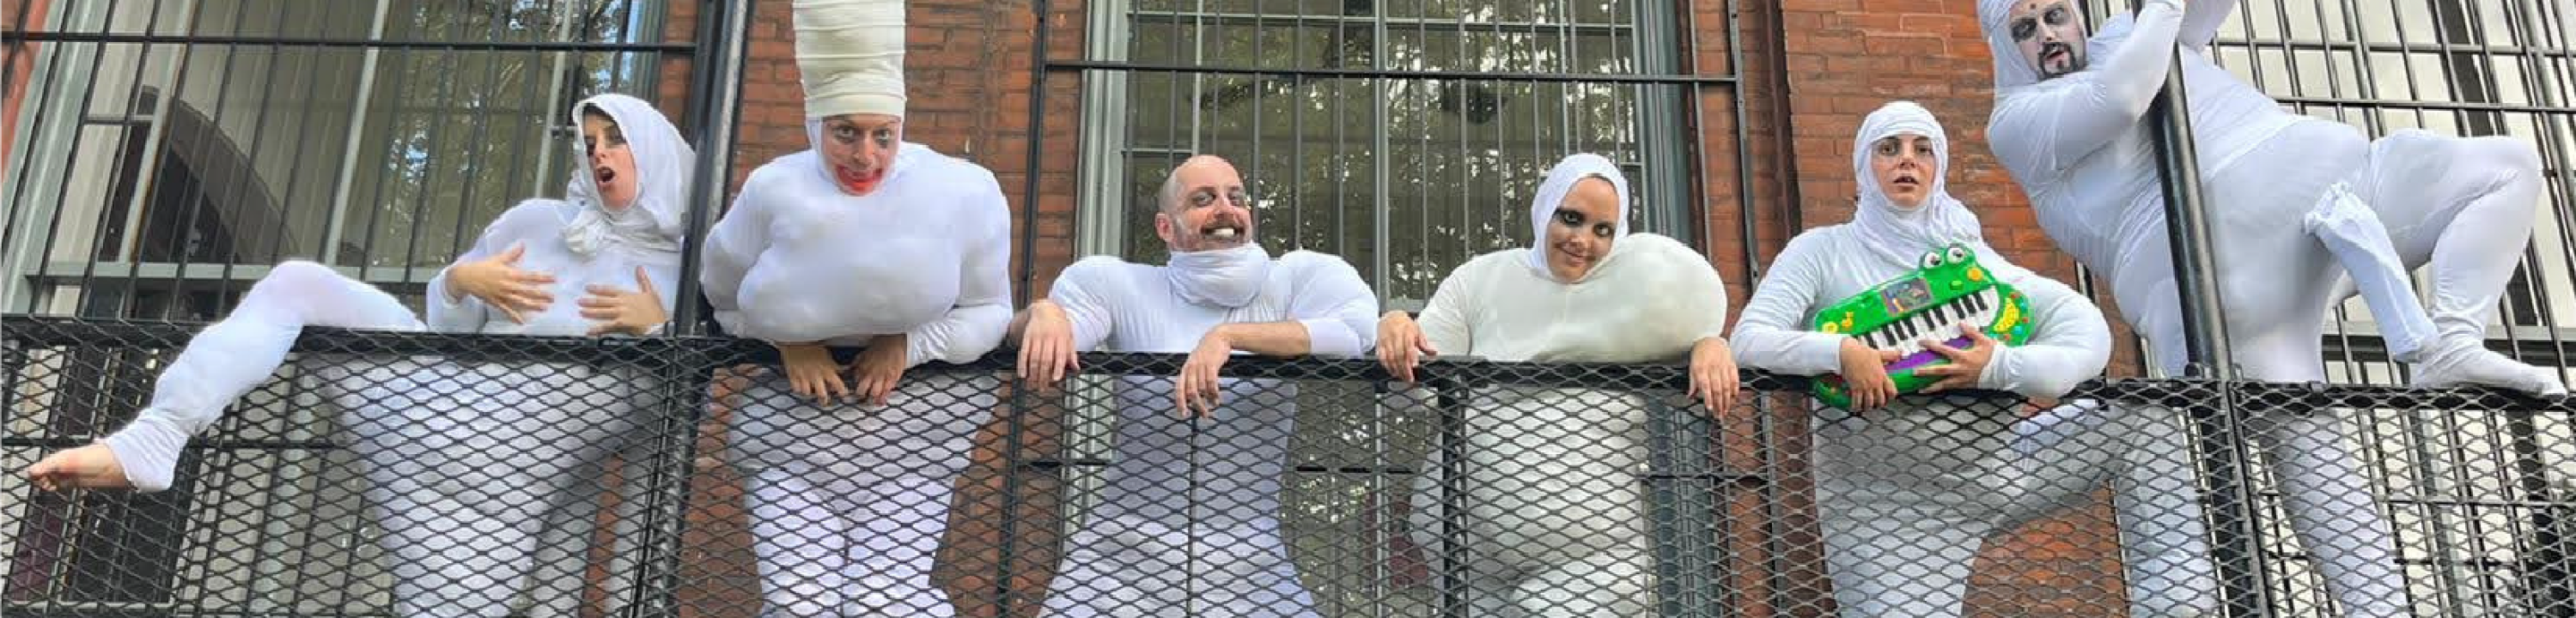 Actors in white costumes stand on a fire escape in various humorous poses